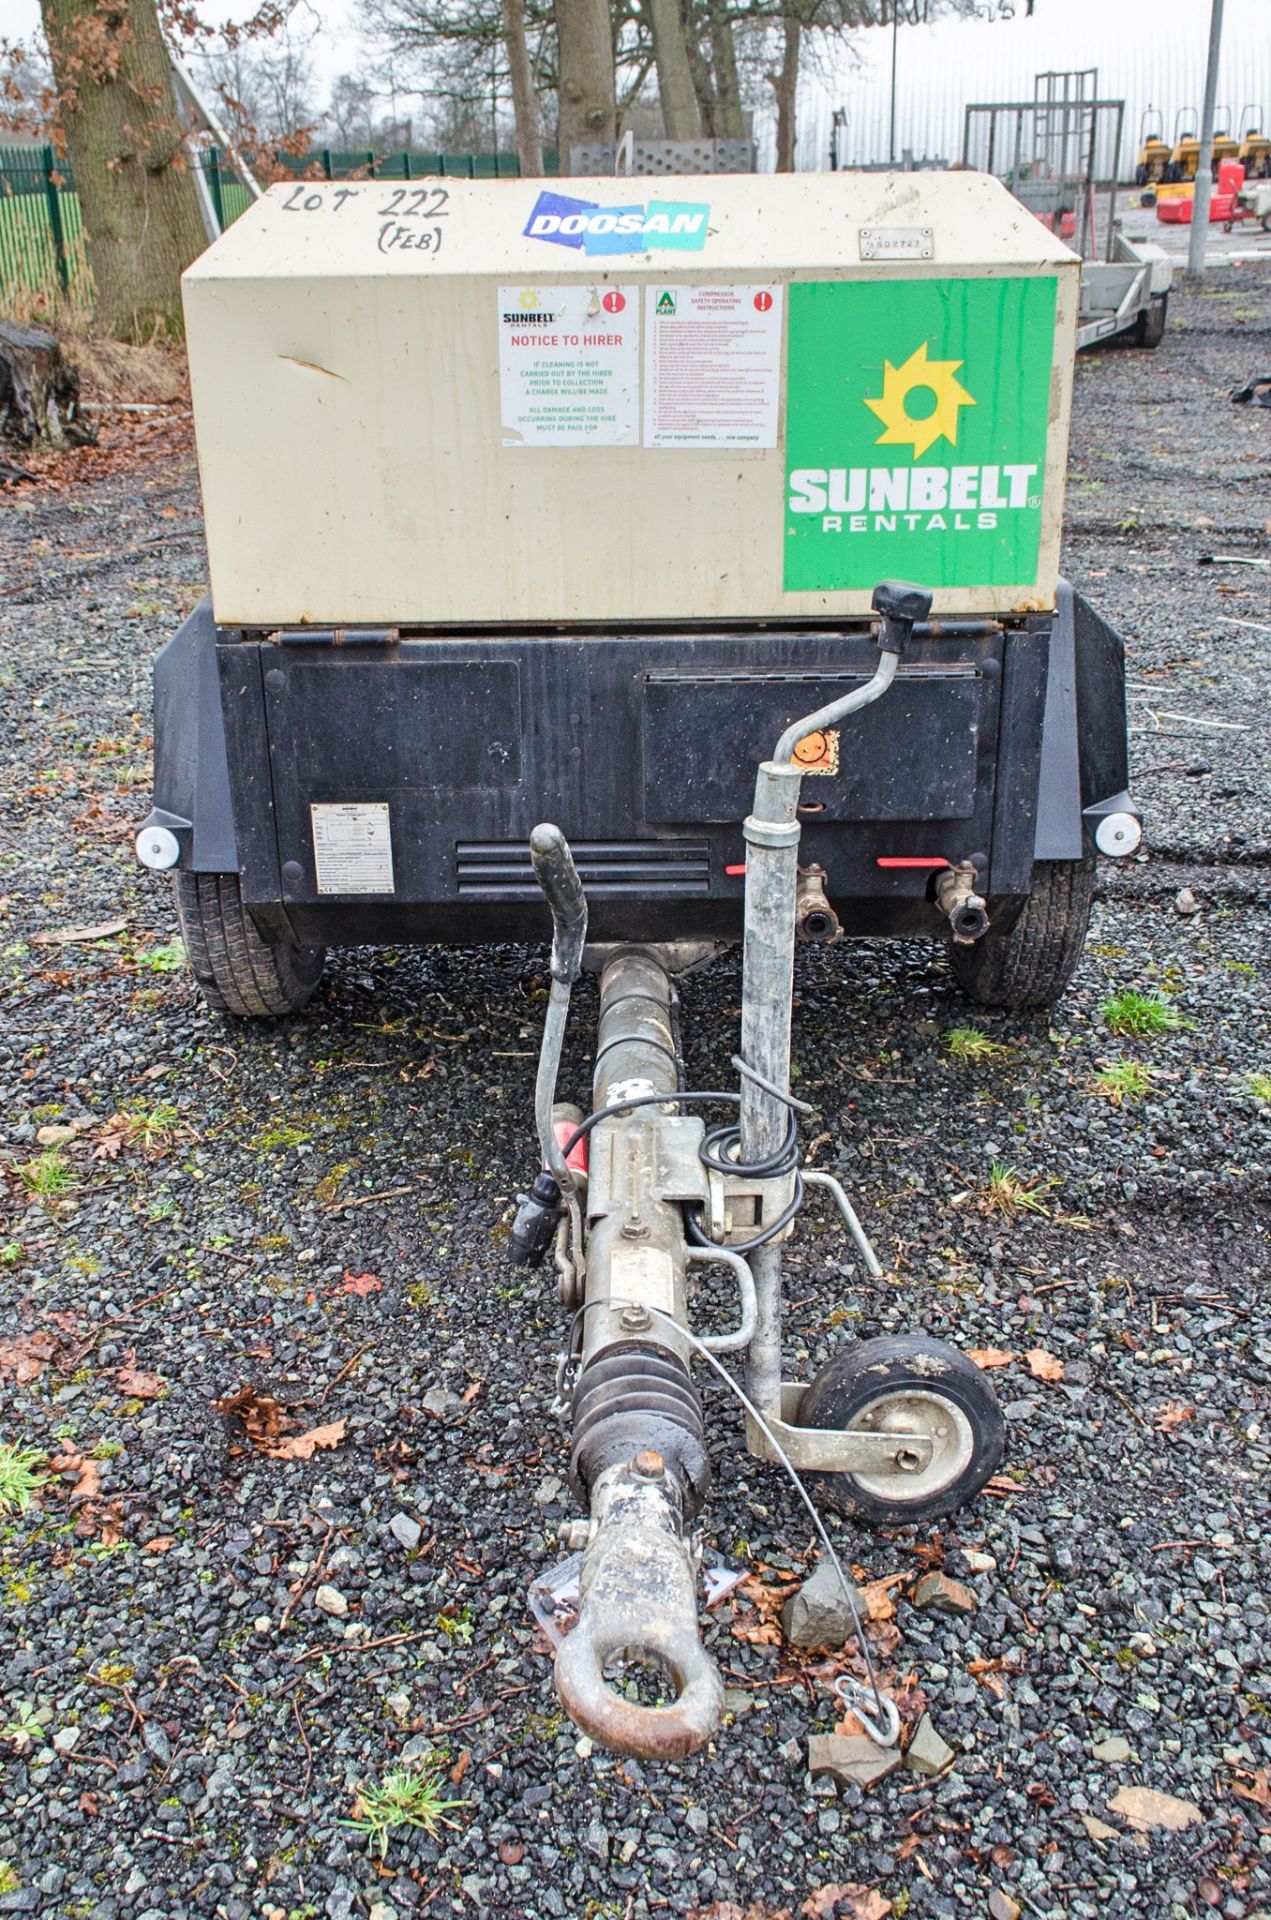 Doosan 7/41 diesel driven fast tow mobile air compressor Year: 2013 S/N: 431992 Recorded hours: 1374 - Image 3 of 7